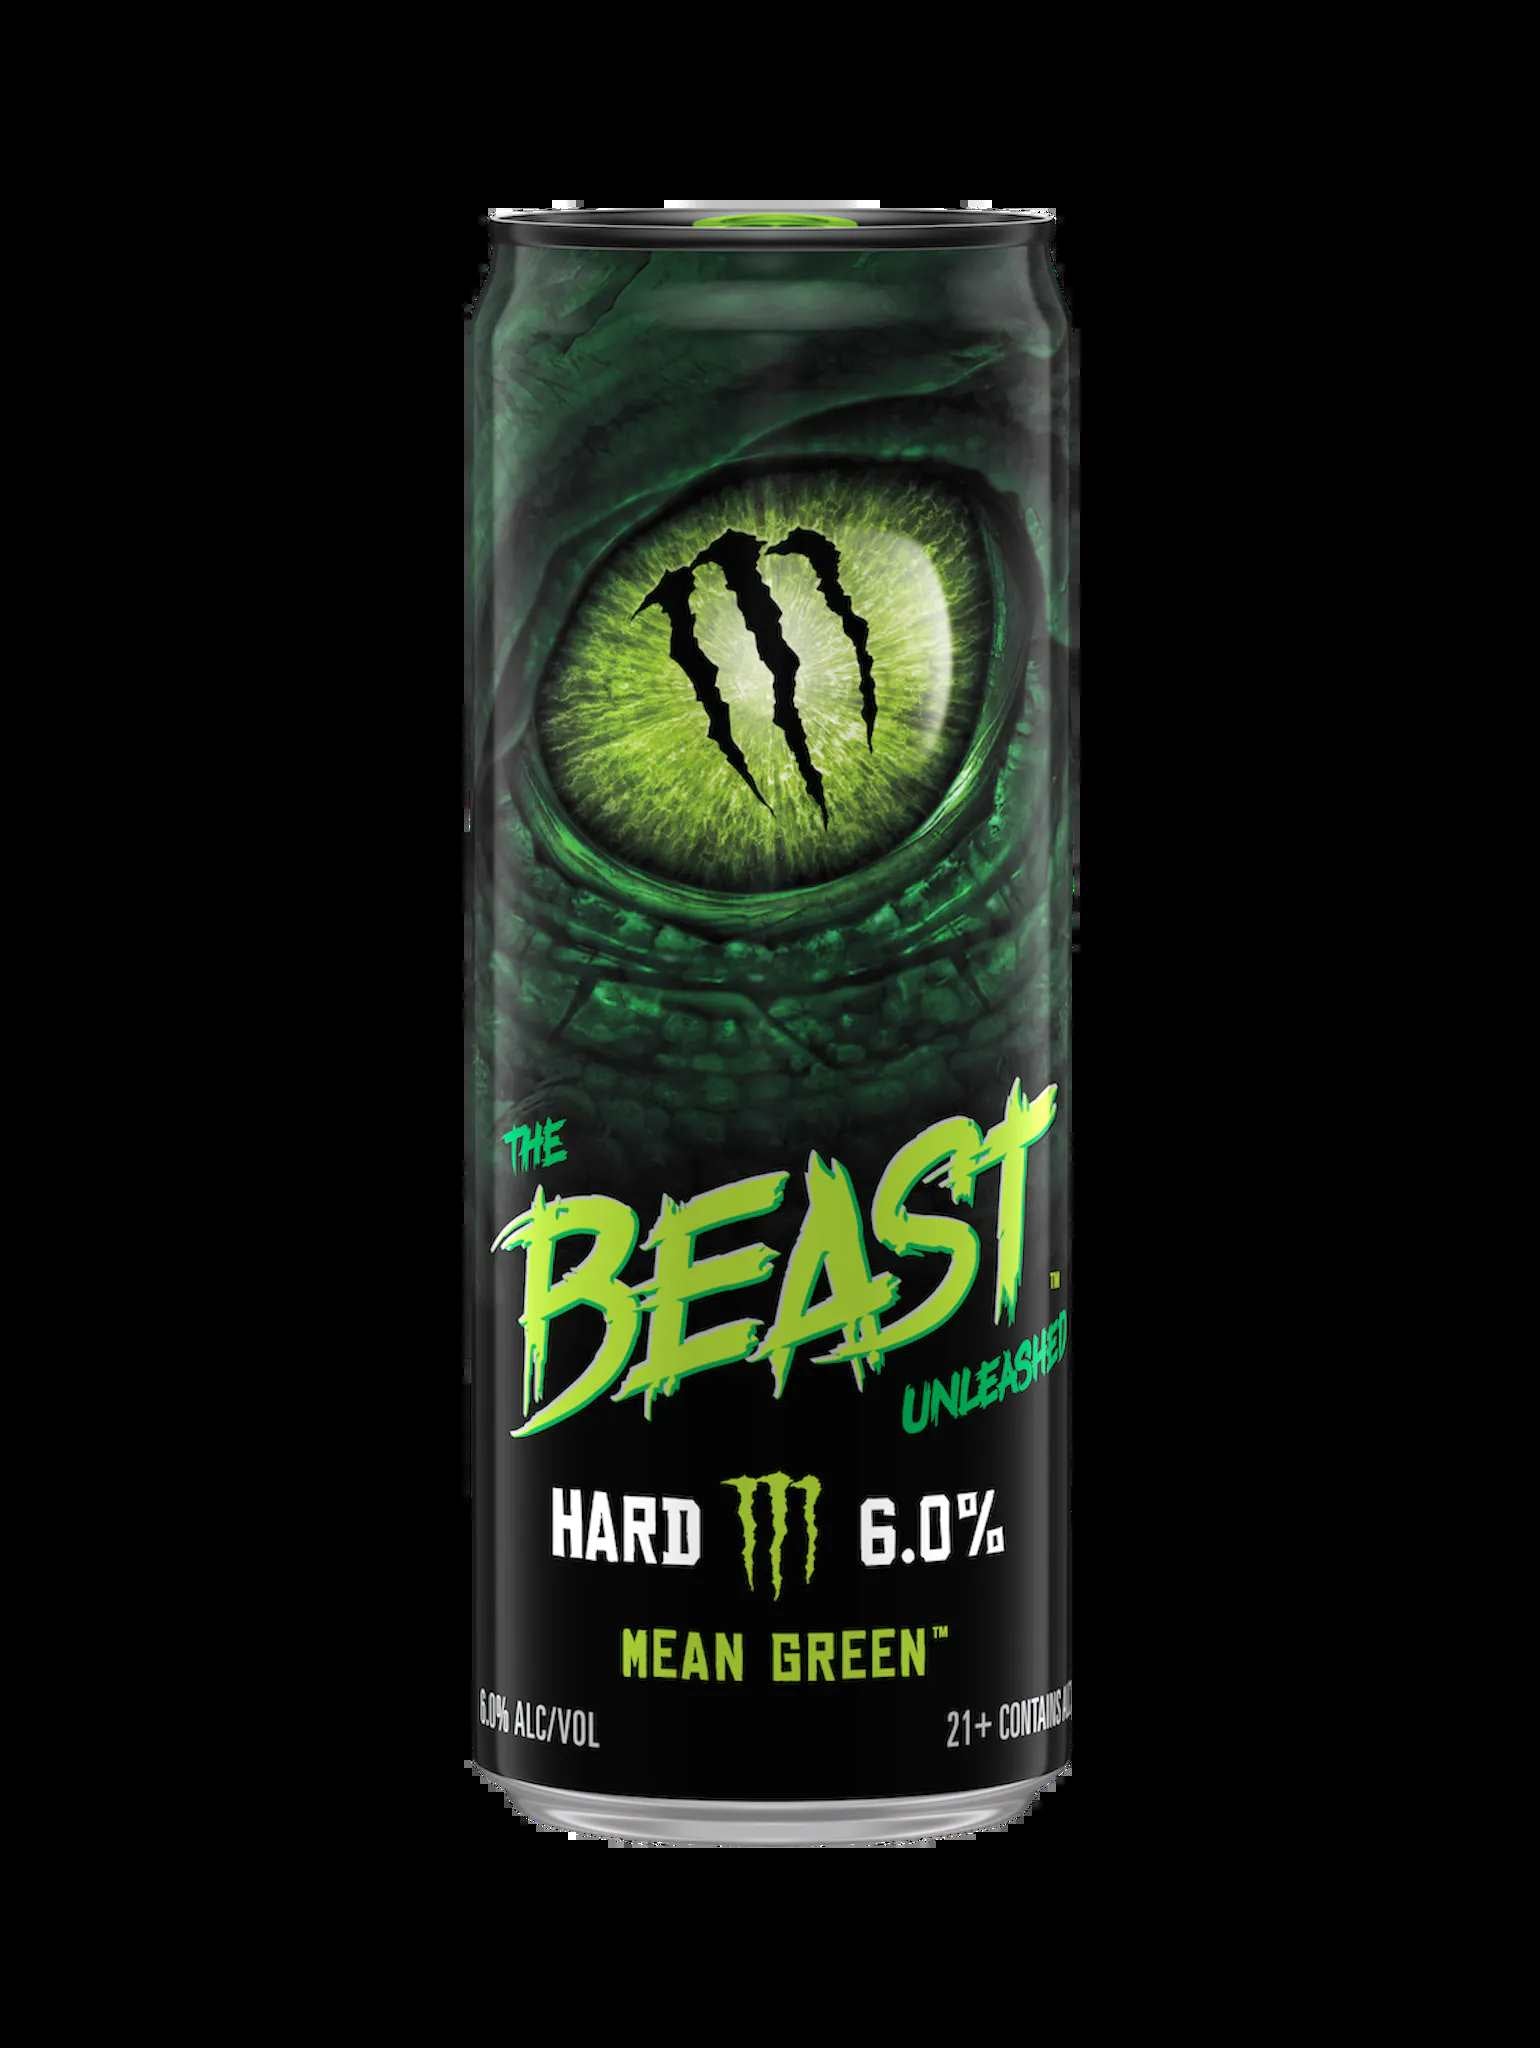 Monster The Beast Unleashed Mean Green 355ml FULL ( lattine con ammaccature ) beast beast unleashed beast24 hard tea monster monster energy nasty nasty beast not-on-sale unleashed usa